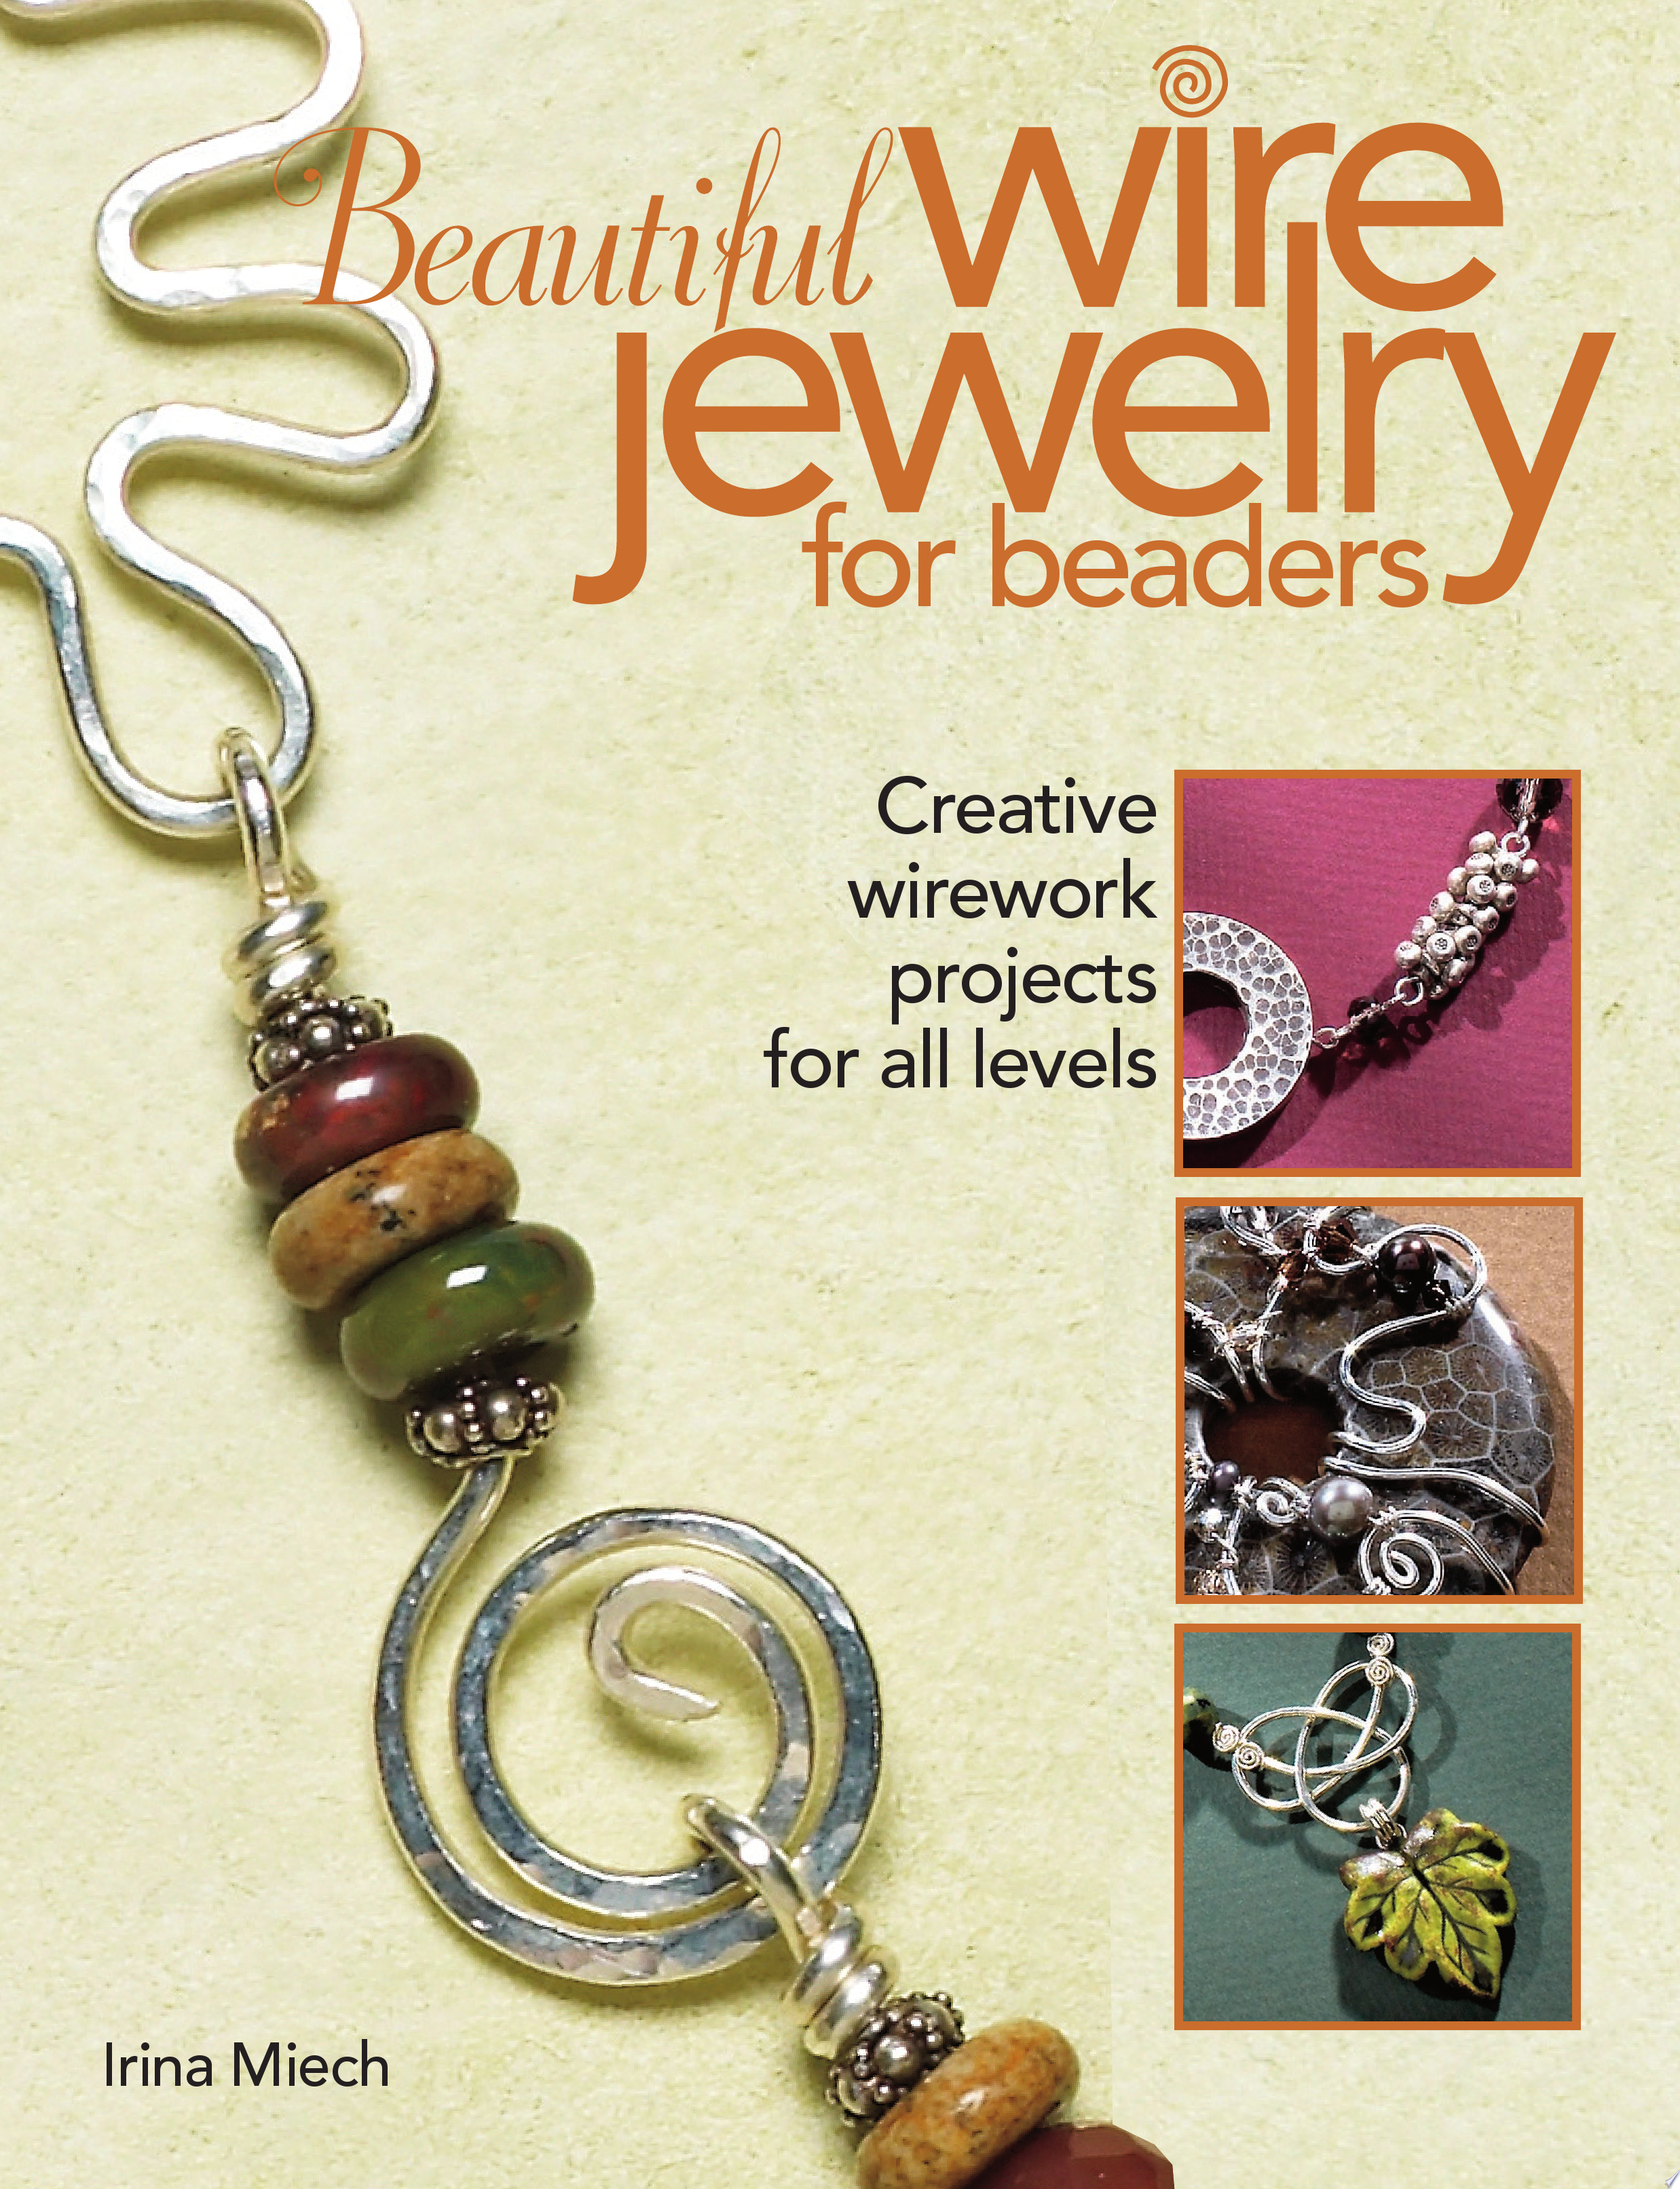 Image for "Beautiful Wire Jewelry for Beaders"